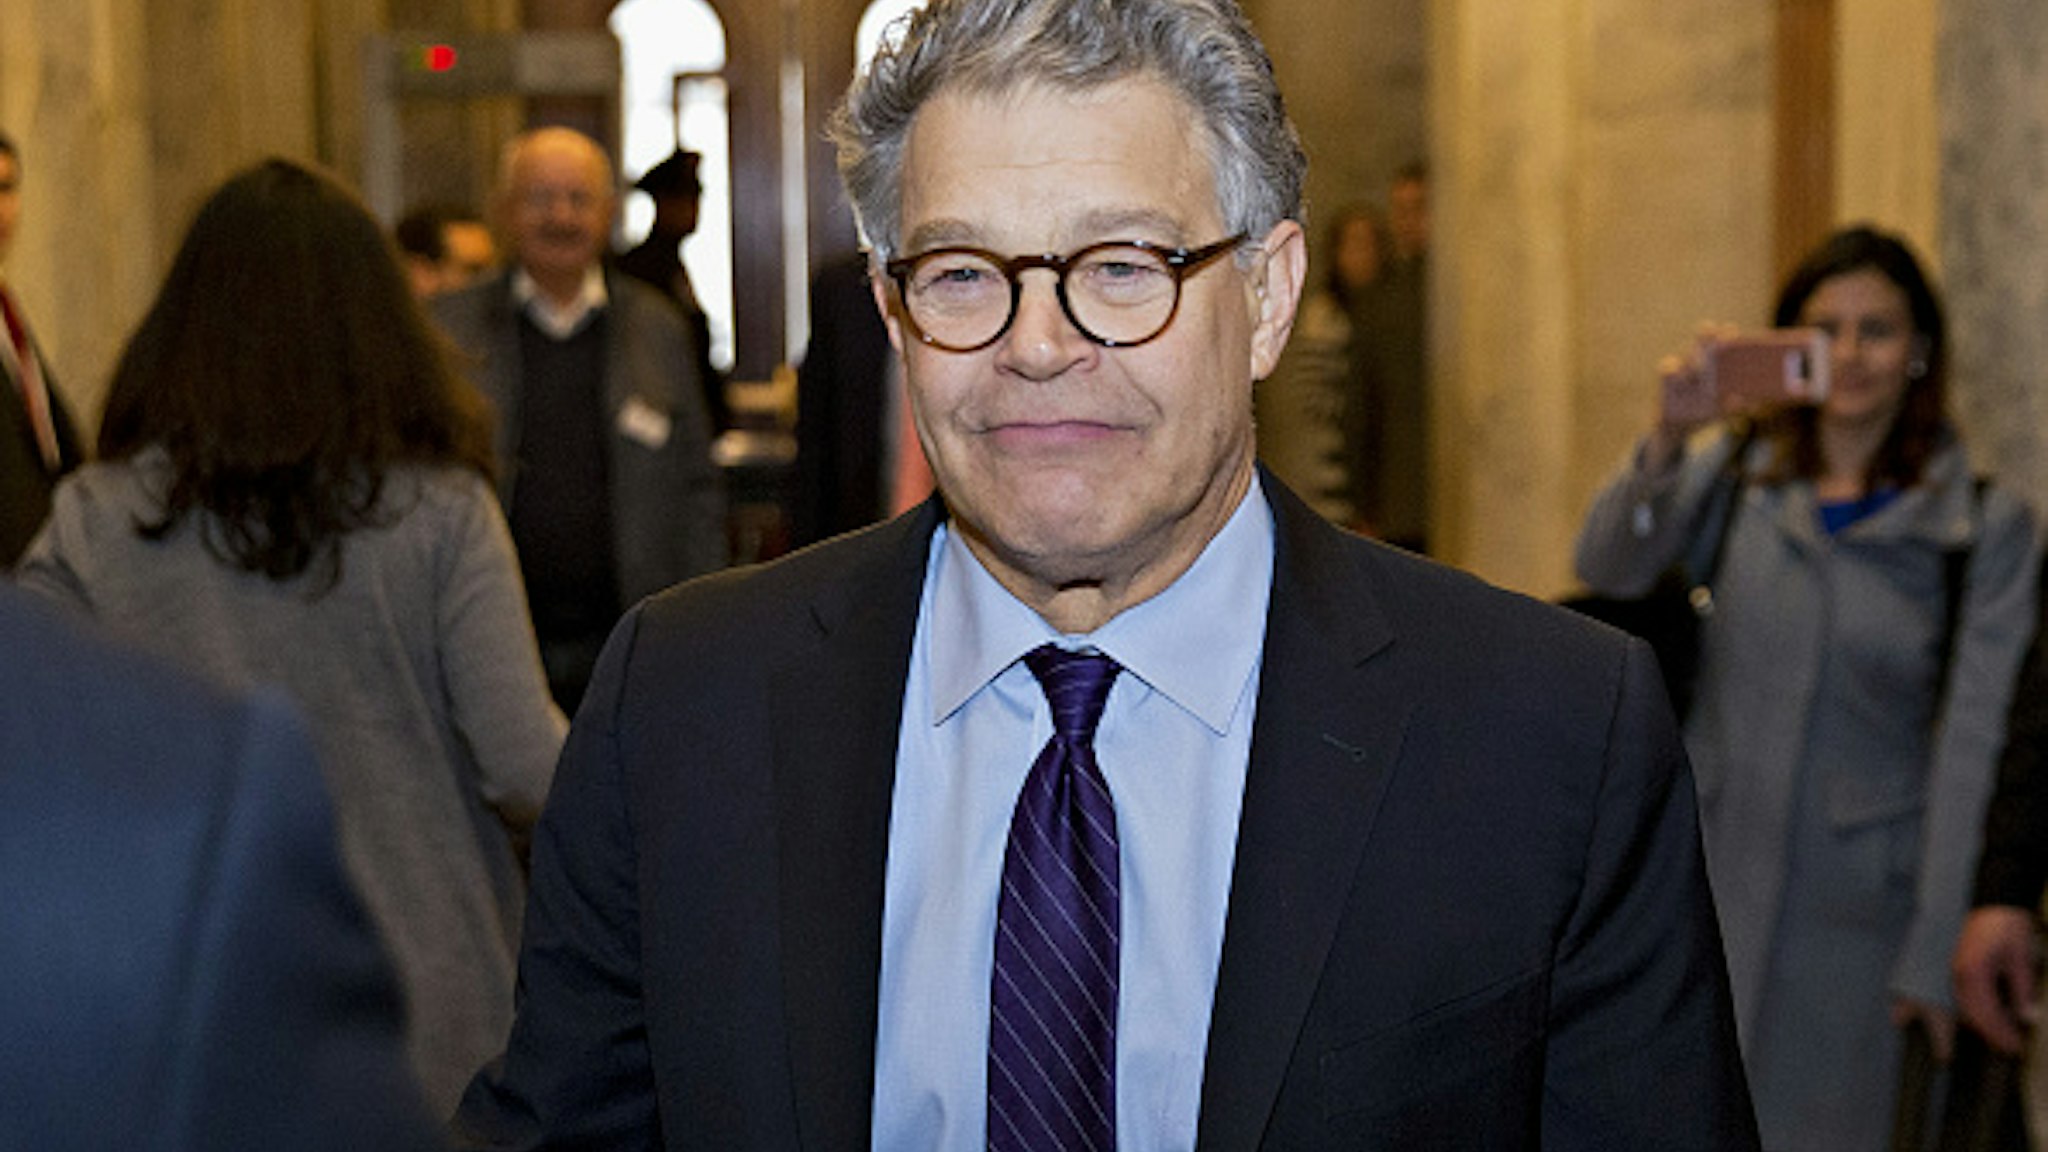 Senator Al Franken, a Democrat from Minnesota, walks through the U.S. Capitol before speaking on the Senate floor in Washington, D.C., U.S., on Thursday, Dec. 7, 2017. Franken announced Thursday hell resign to end the turmoil over allegations that he groped or tried to forcibly kiss several women after more than half of his Democratic colleagues demanded he step down to make clear that mistreatment of women is unacceptable.